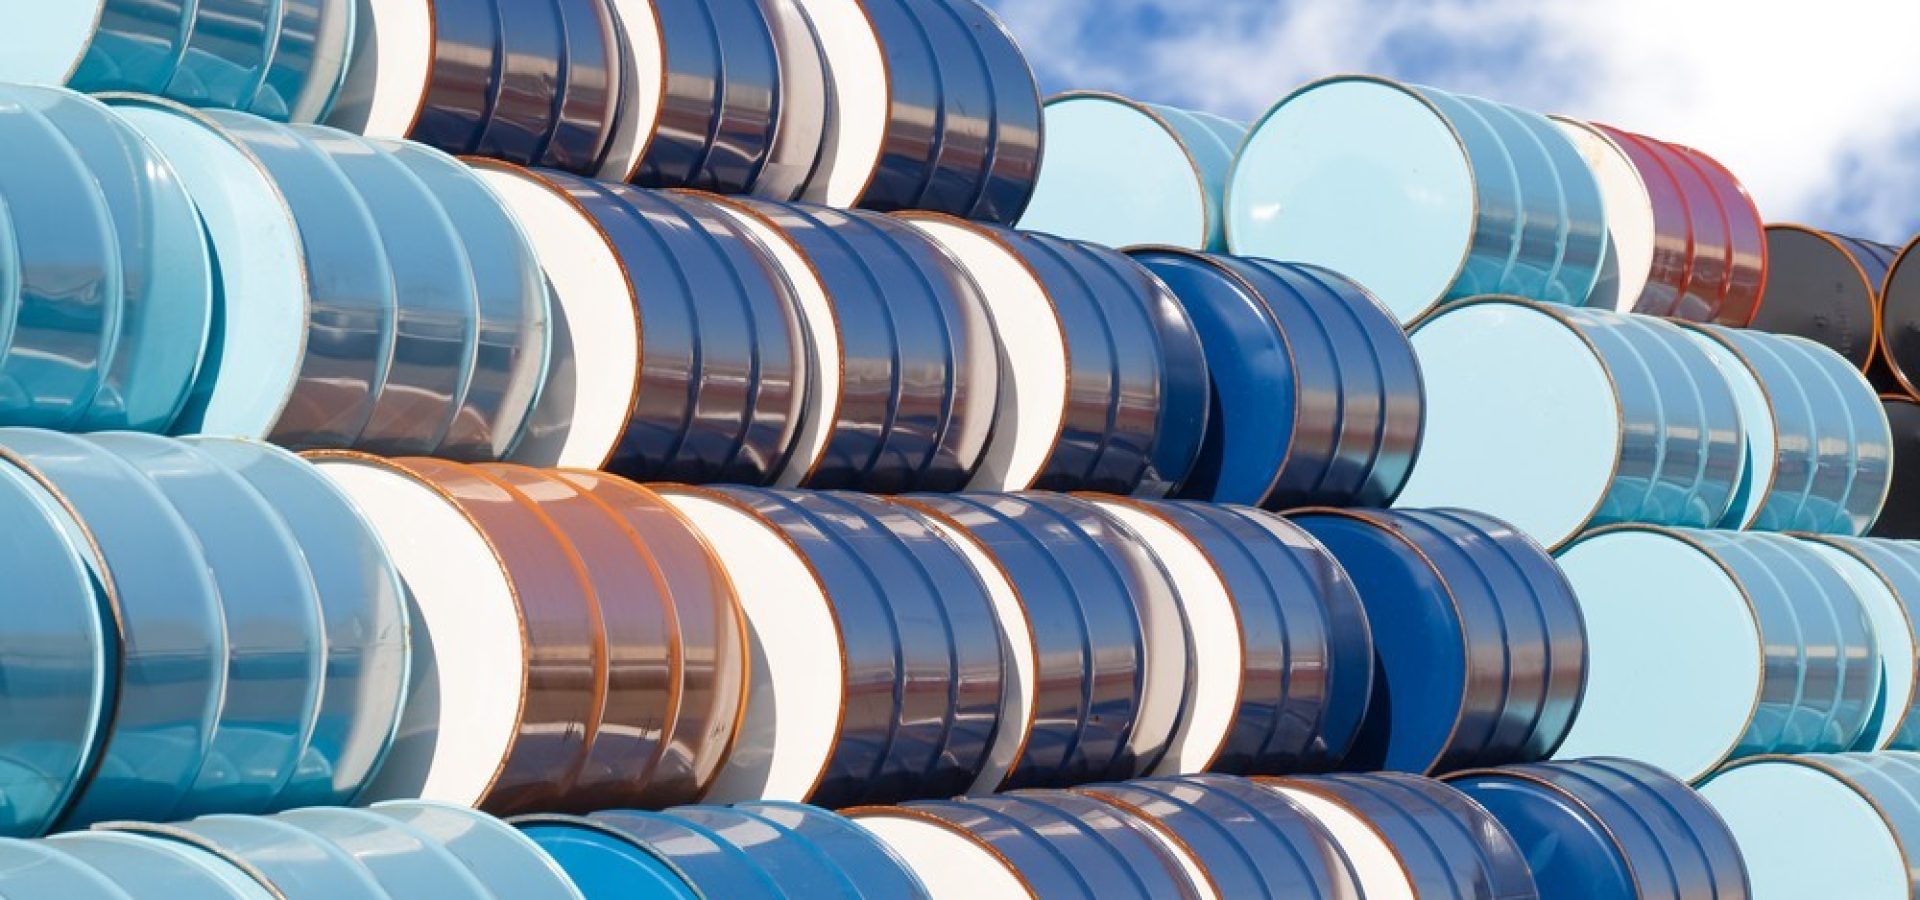 Wibest – Oil and petroleum: Oil barrels stacked together.